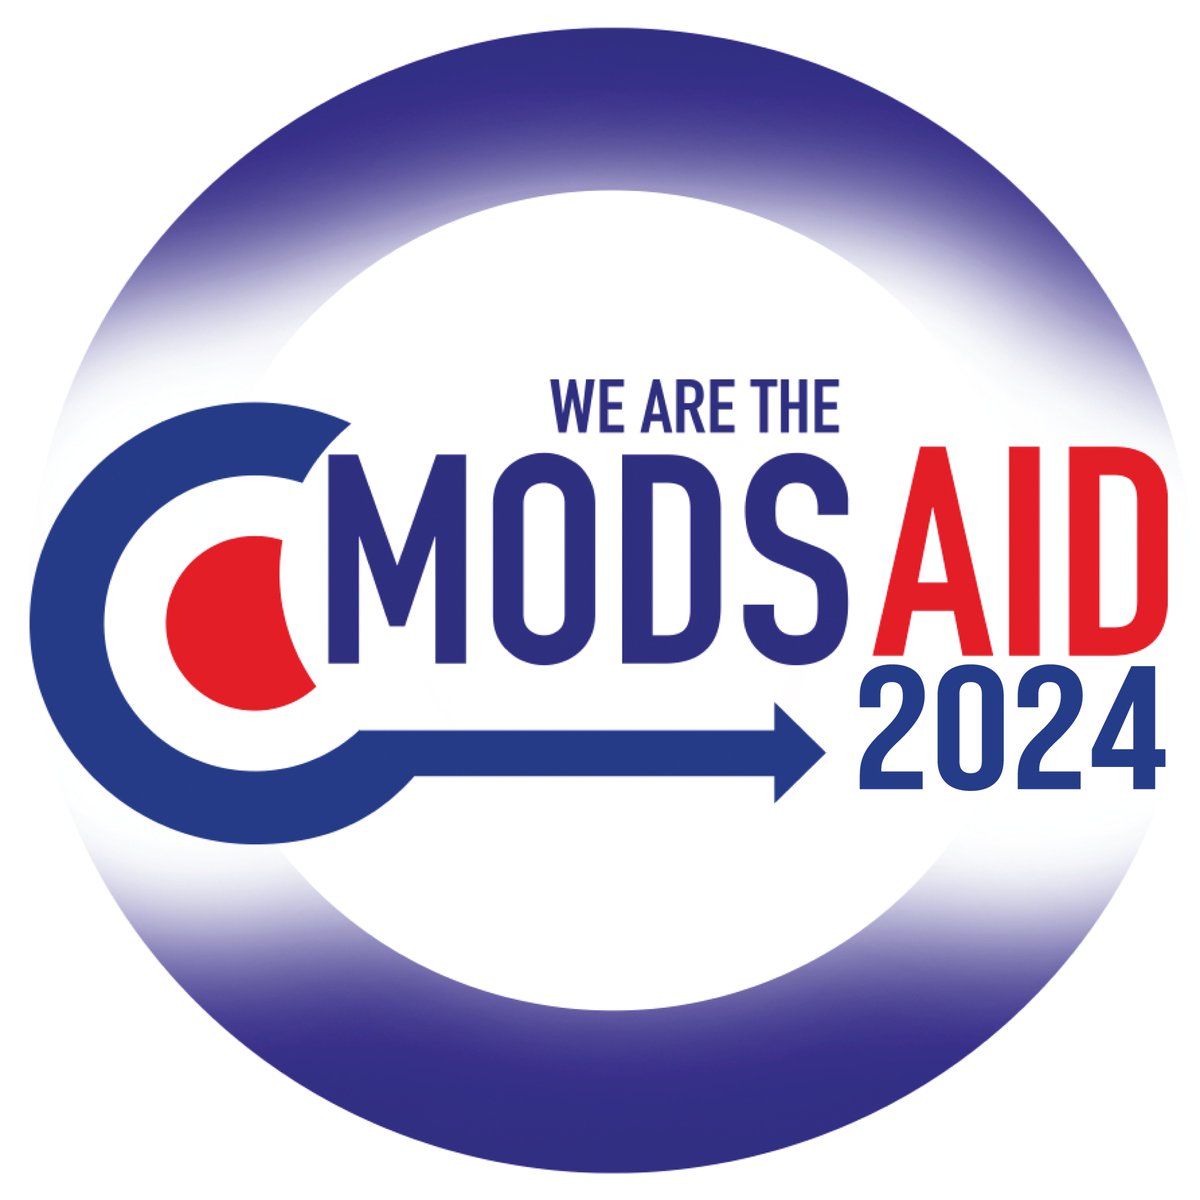 Sussex Homeless Support & Black Rabbit Productions Presents We Are The Mods-Aid 2024 With 7 Mod and mod influenced bands + DJs A raffle Mod Market stalls Food stalls Scooter show with Trophies Plus much more to be announced Grab your tickets here...bit.ly/44rr4wd